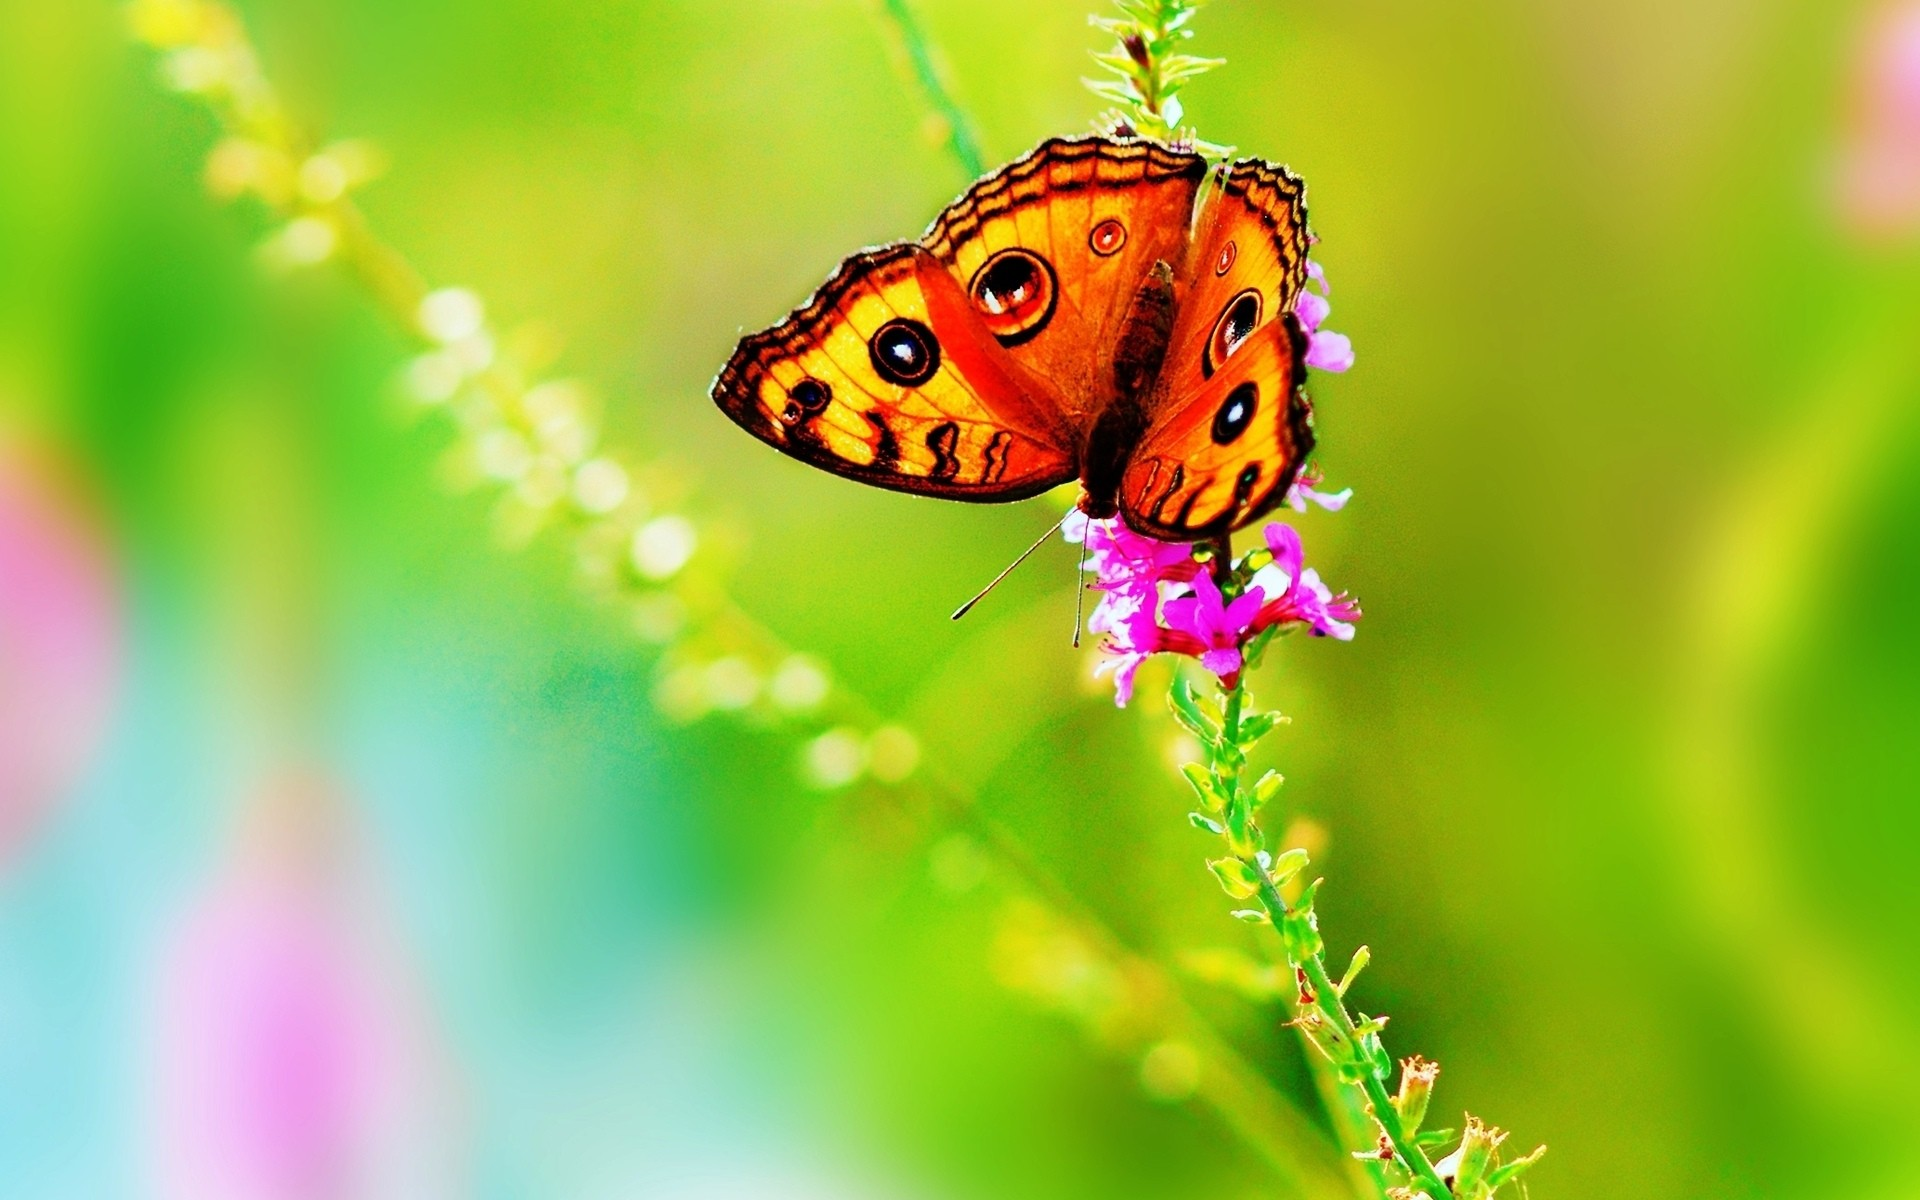 Bright Colorful Butterfly Wallpaper   Wallpaper 37385